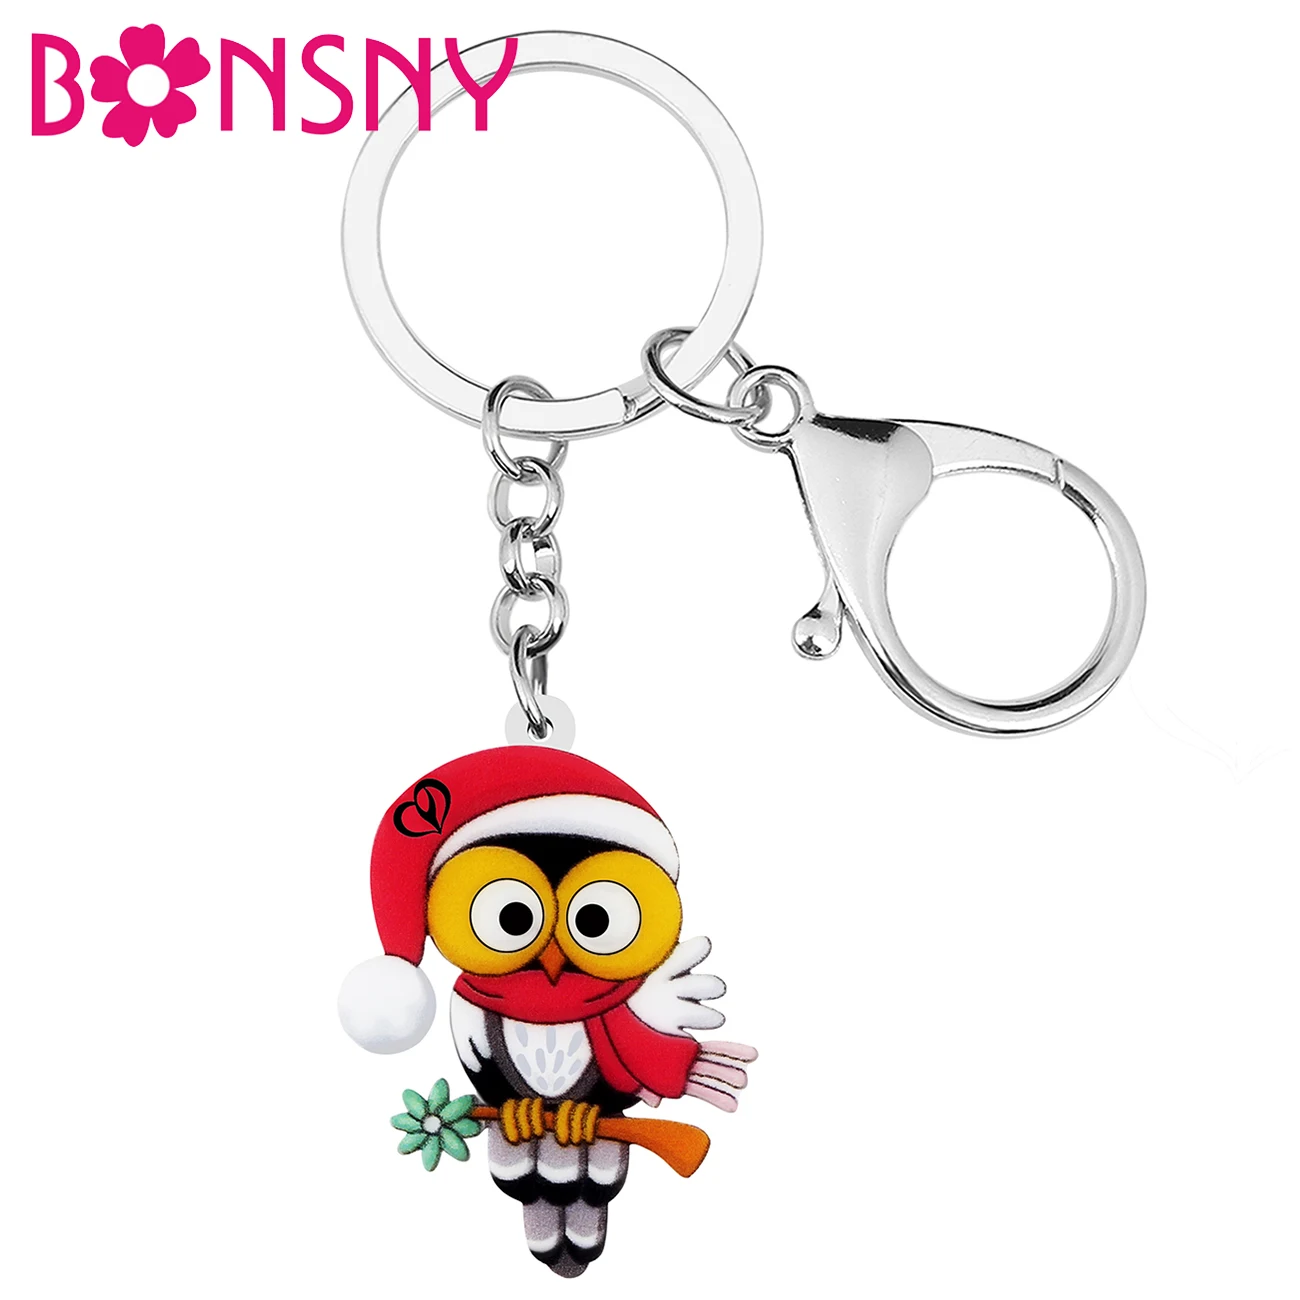 

BONSNY Acrylic Cute Cartoon Christmas Red Hat Scarf Owl Birds Keychains Trendy Car Key Chain Ring Jewelry For Women Teen Gifts